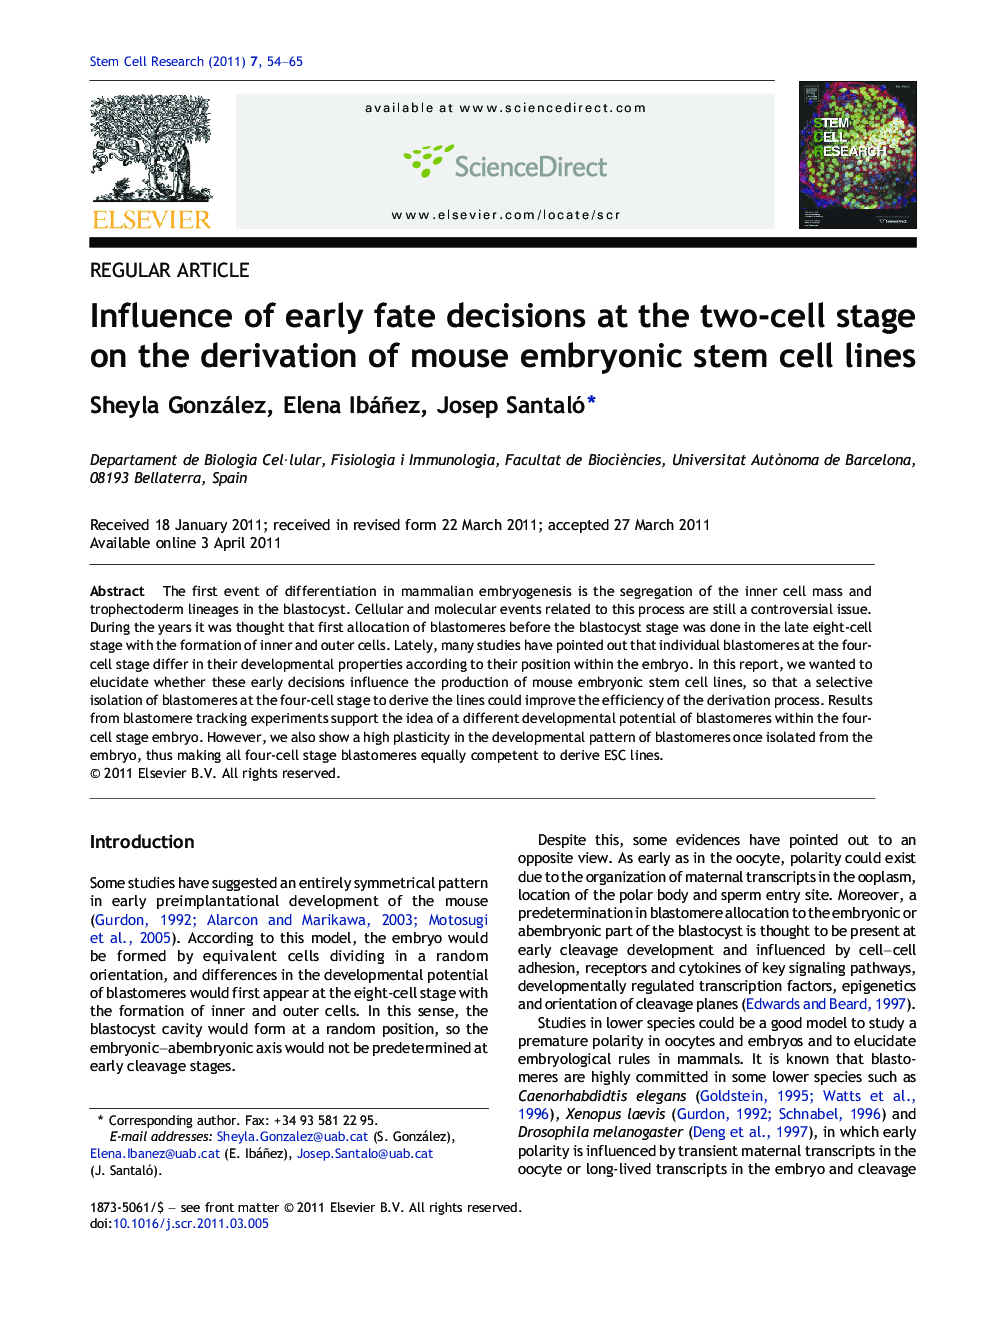 Influence of early fate decisions at the two-cell stage on the derivation of mouse embryonic stem cell lines